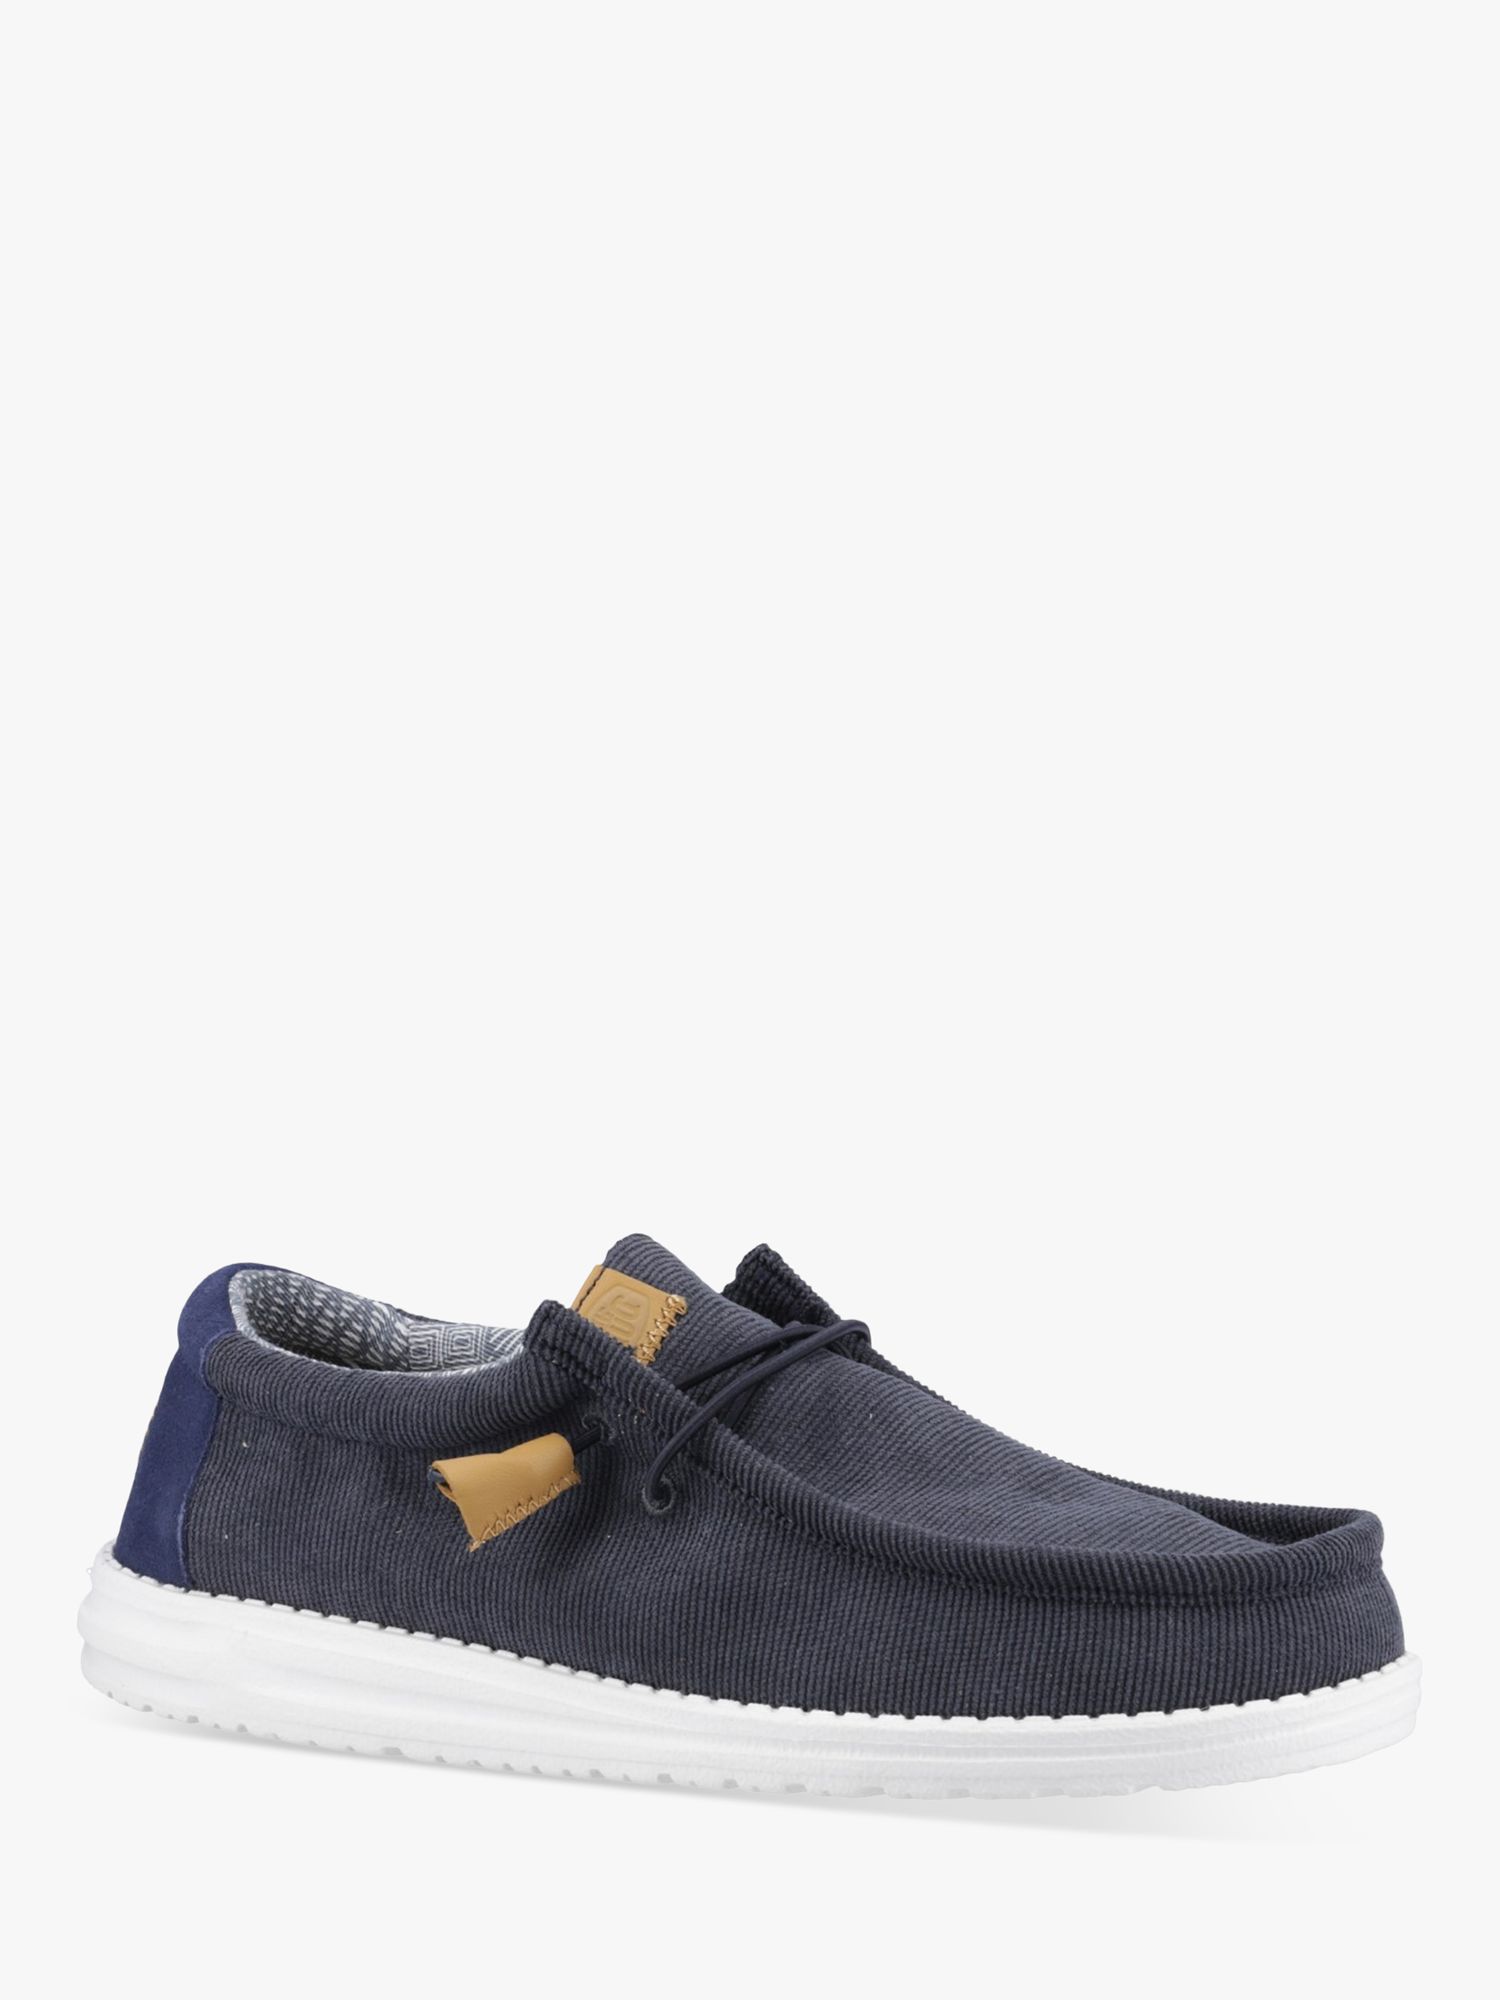 Hey Dude Wally Corduroy Moccasins, Navy at John Lewis & Partners